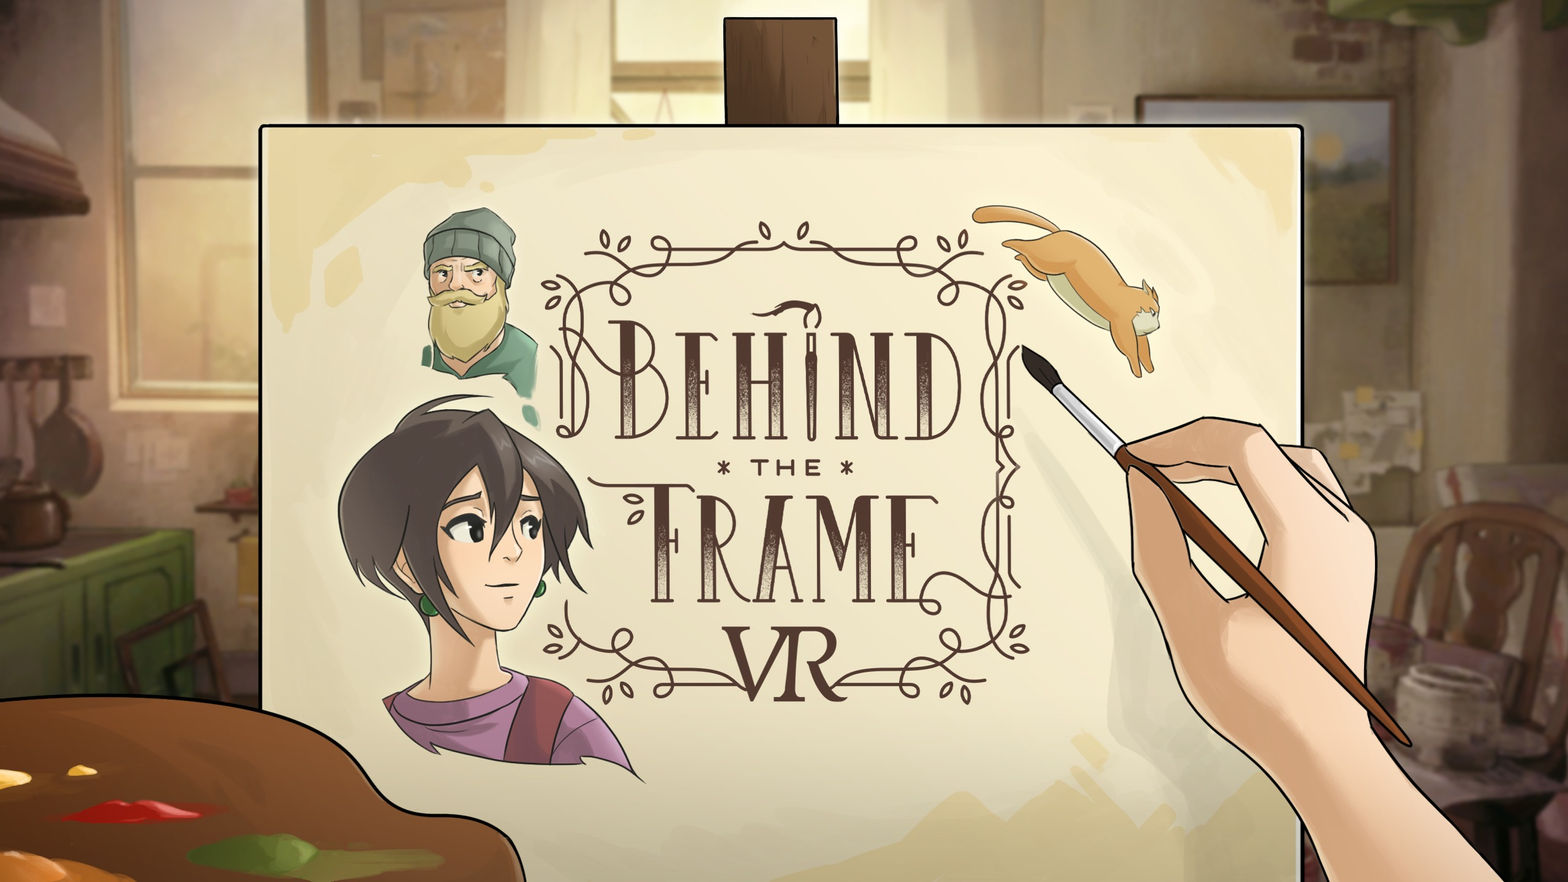 Behind The Frame: The Finest Scenery VR